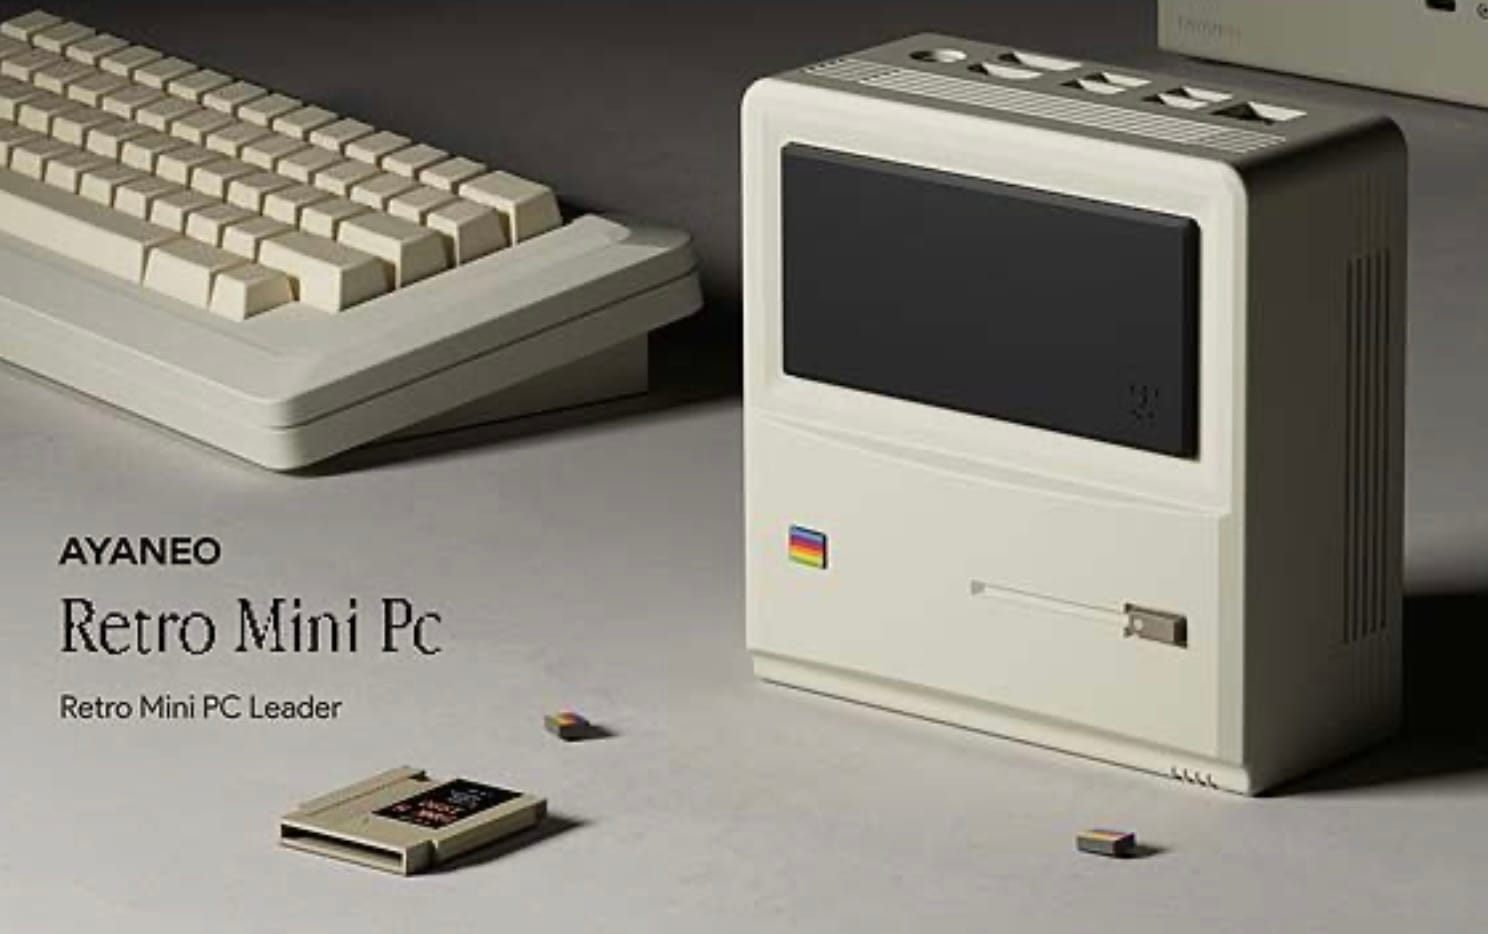 A compact vintage computer that transports you to the past.